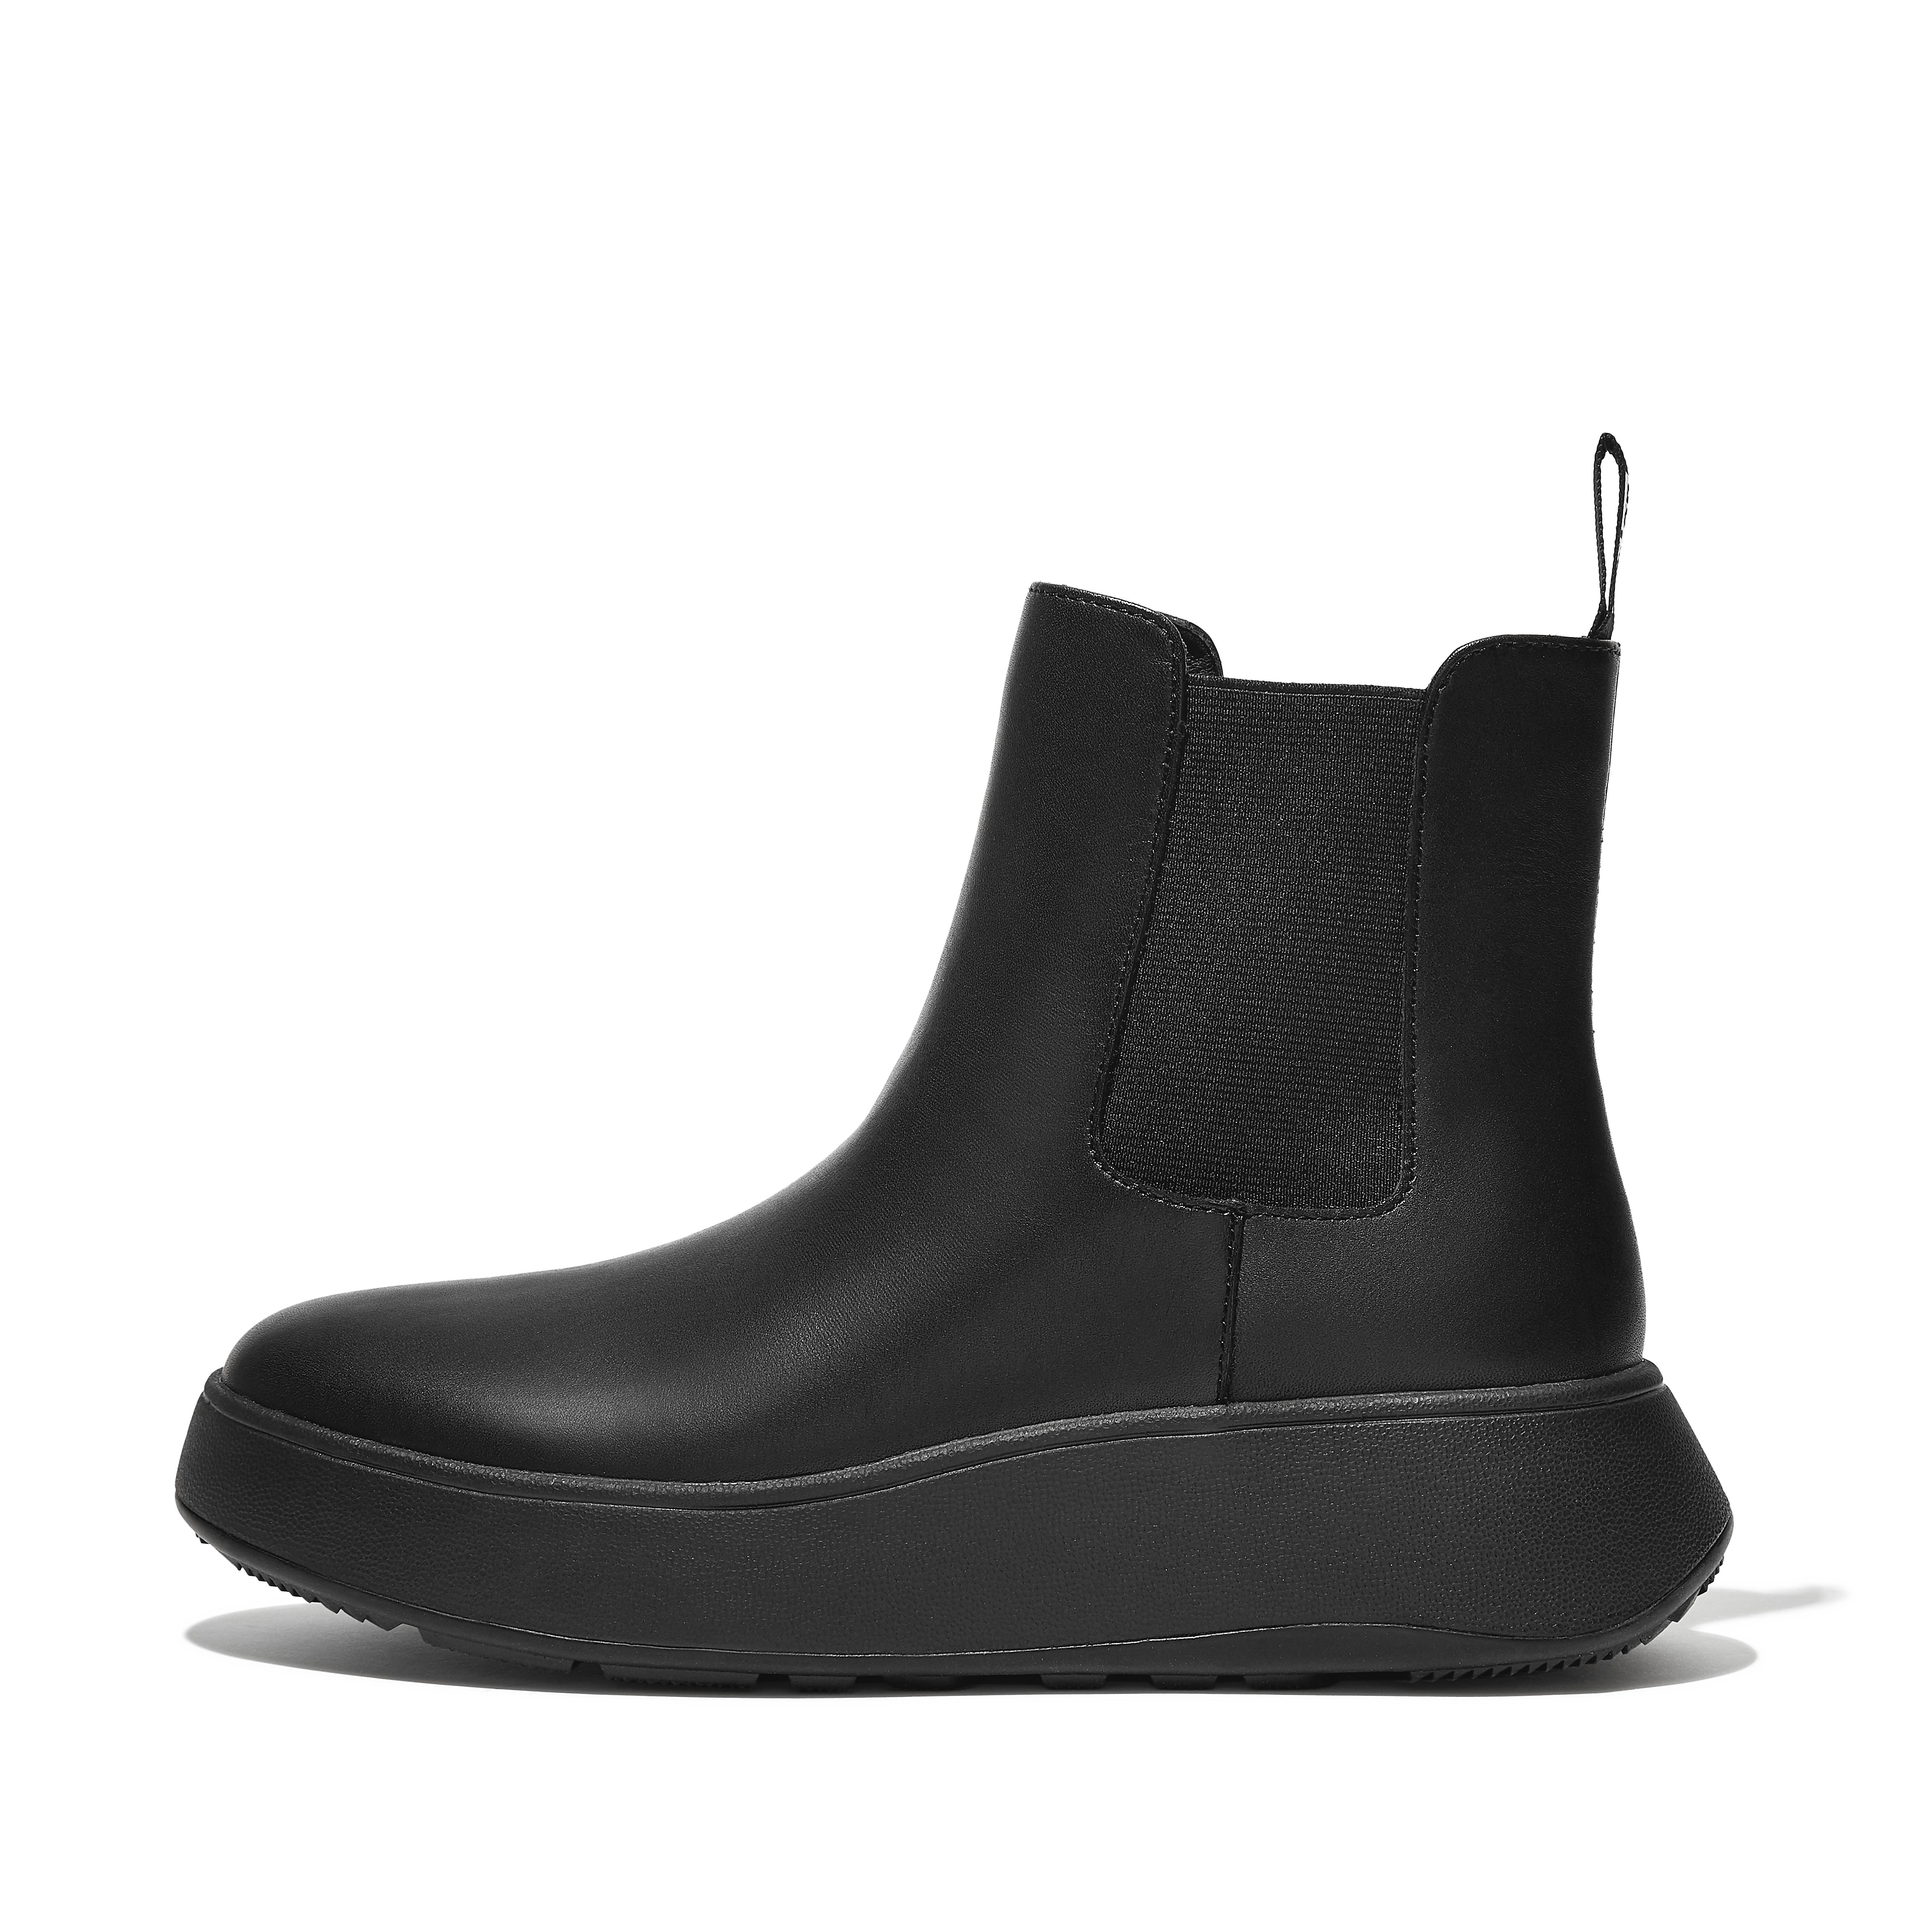 Women's F-Mode Leather Flatform Chelsea Boots | FitFlop US